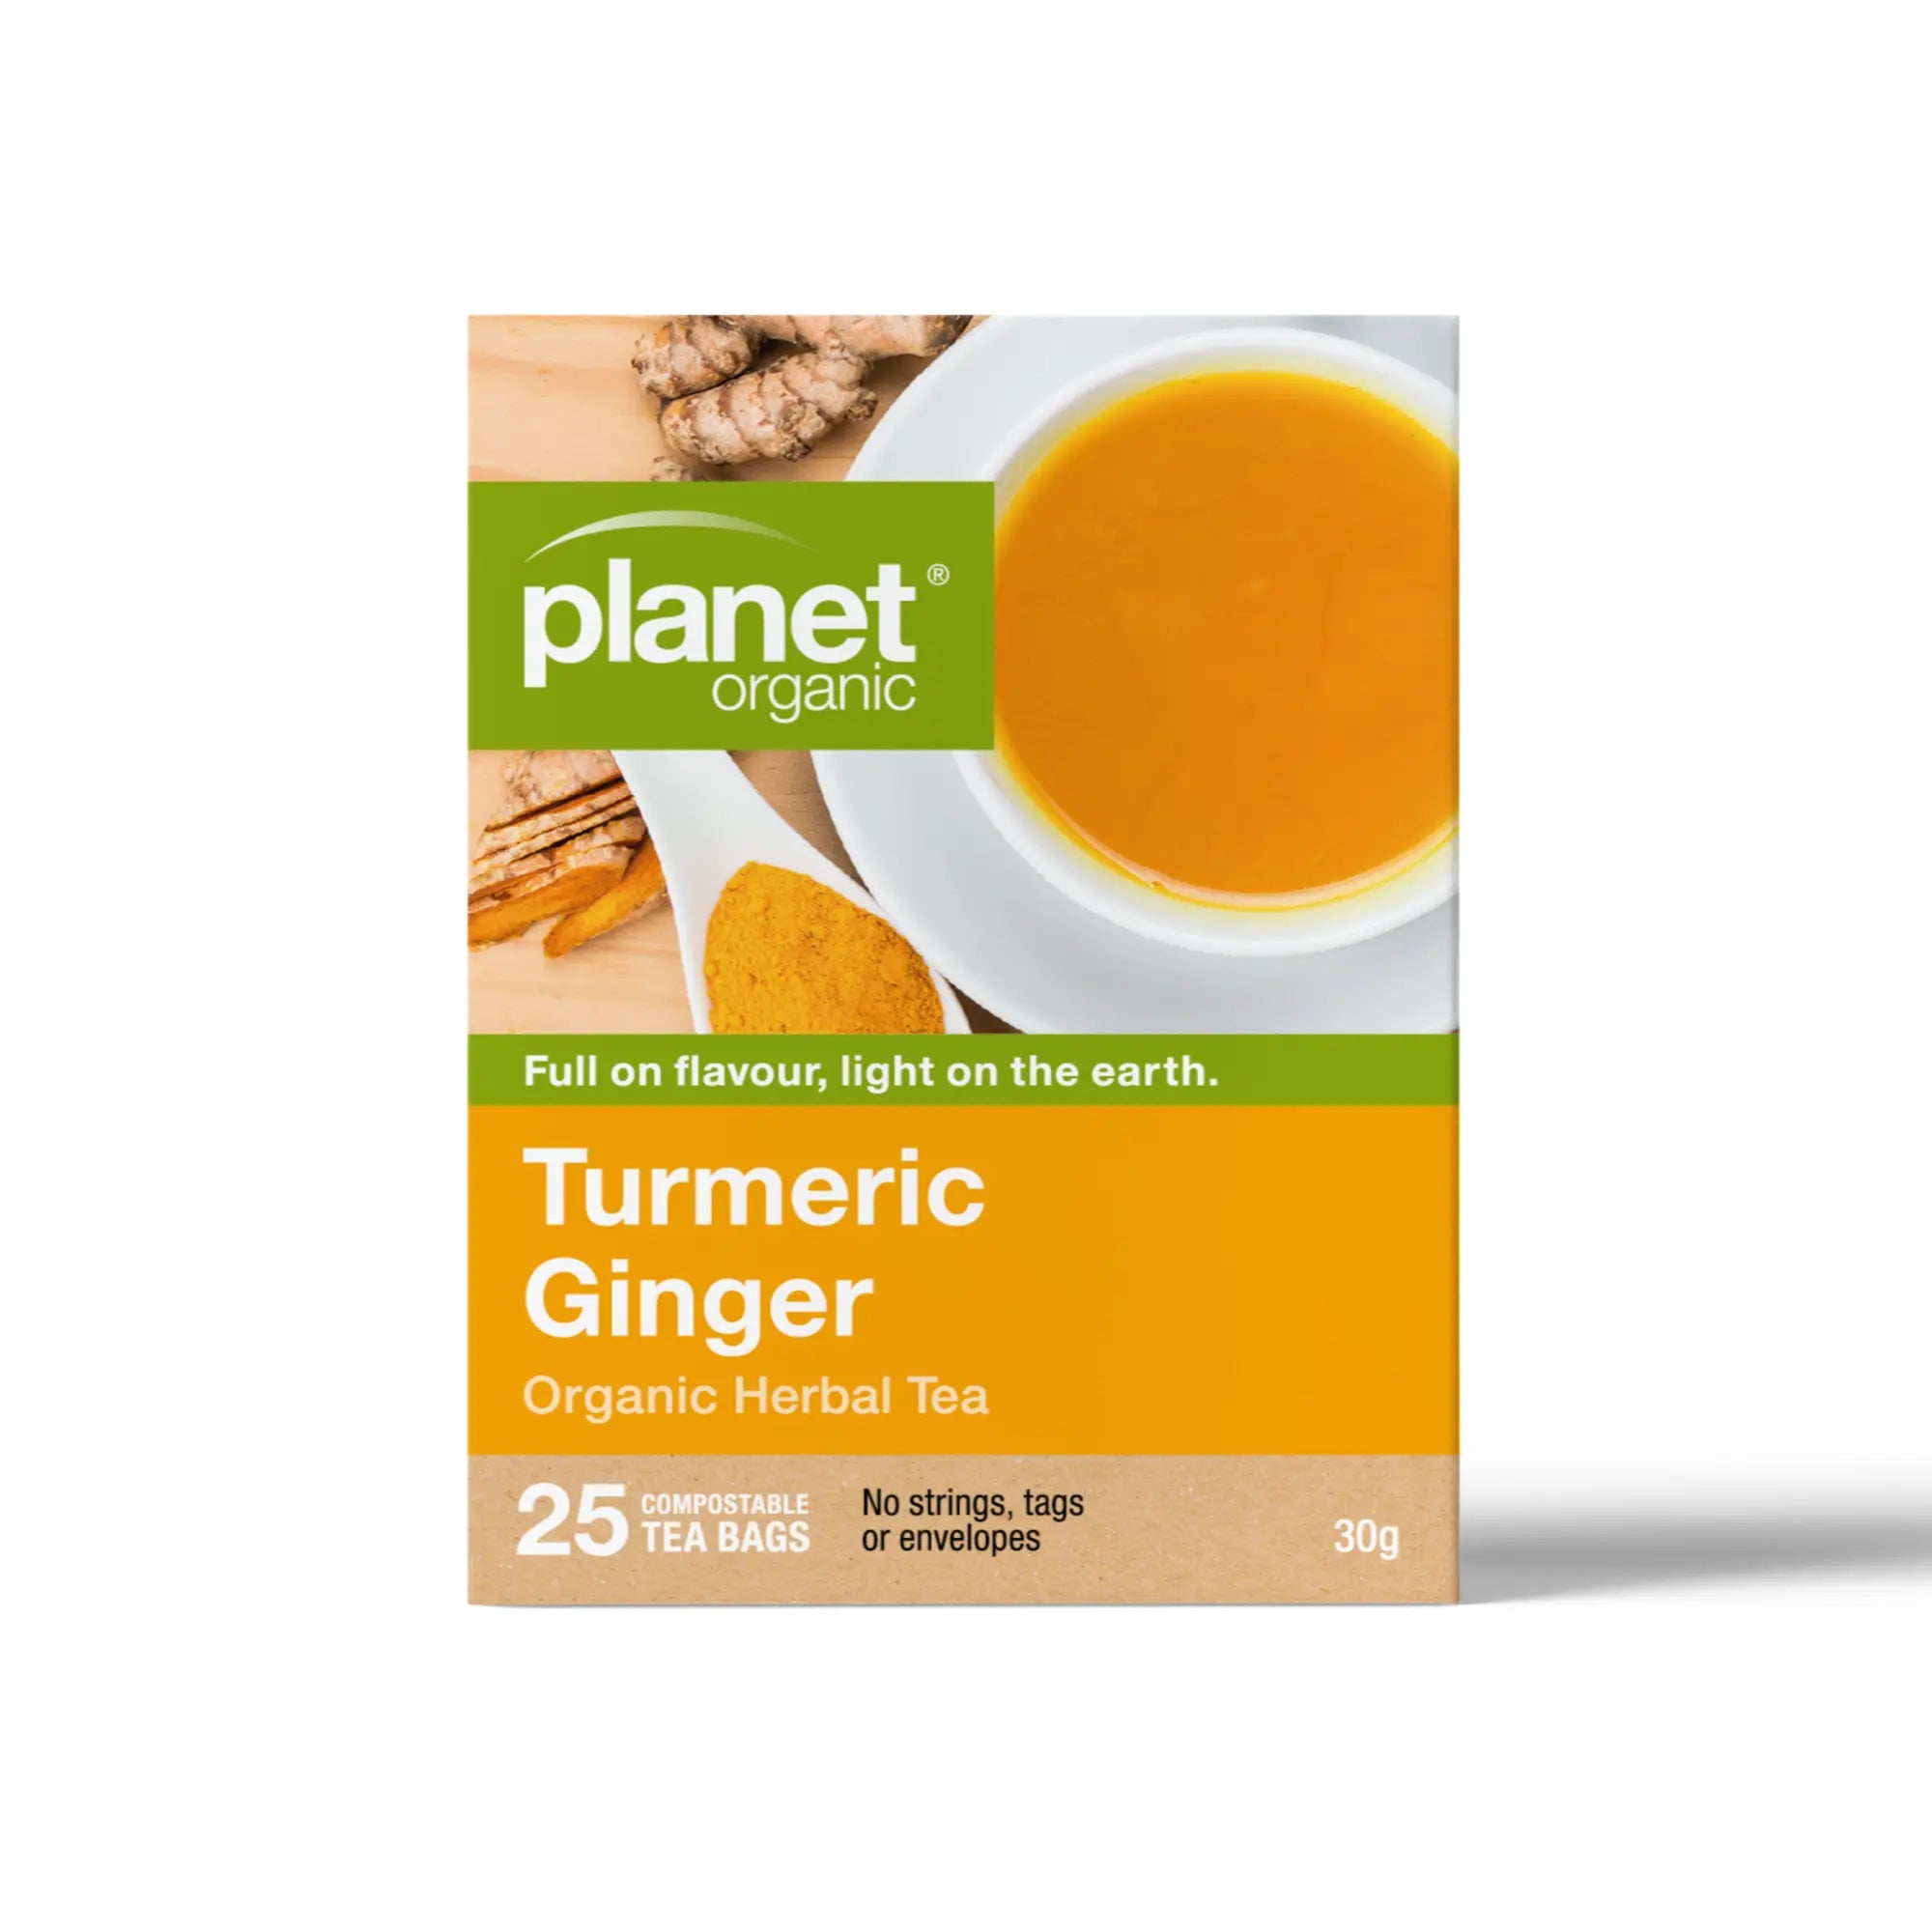 Turmeric and Ginger Drink for Inflammation - Certified Organic